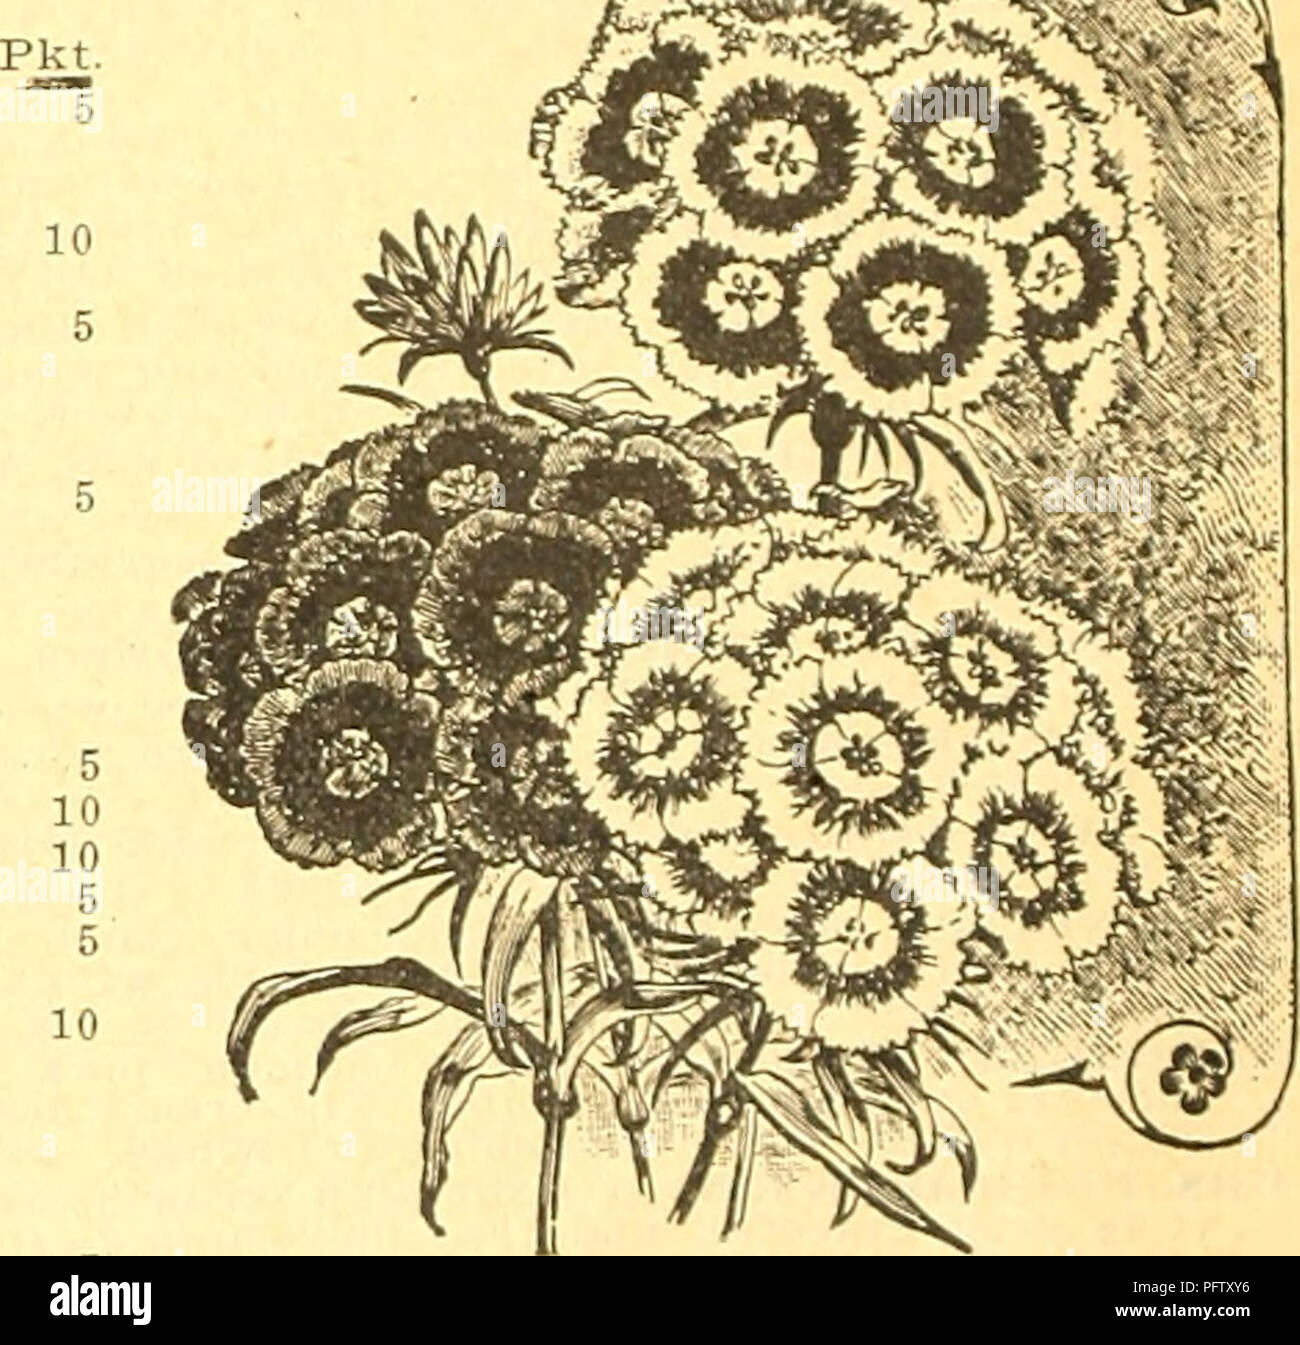 . Currie's farm &amp; garden annual : spring 1922 47th year. Flowers Seeds Catalogs; Bulbs (Plants) Seeds Catalogs; Vegetables Seeds Catalogs; Nurseries (Horticulture) Catalogs; Plants, Ornamental Catalogs; Gardening Equipment and supplies Catalogs. Scabiosa or Mournins' Bride. SCABIOSA Mourning Uride or Siveet Srabioiis. Very desirable plants, producing very pretty flowers of many colors in great profusion. Good for cutting' lor vases, etc. H. A. Pkt. Dwarf DoubleâFlowers very double and globular. % oz. 25c 5 Leviathan &gt;IlxedâLarge and beautiful double flowers; tall growing. % oz. 25c.. 5  Stock Photo